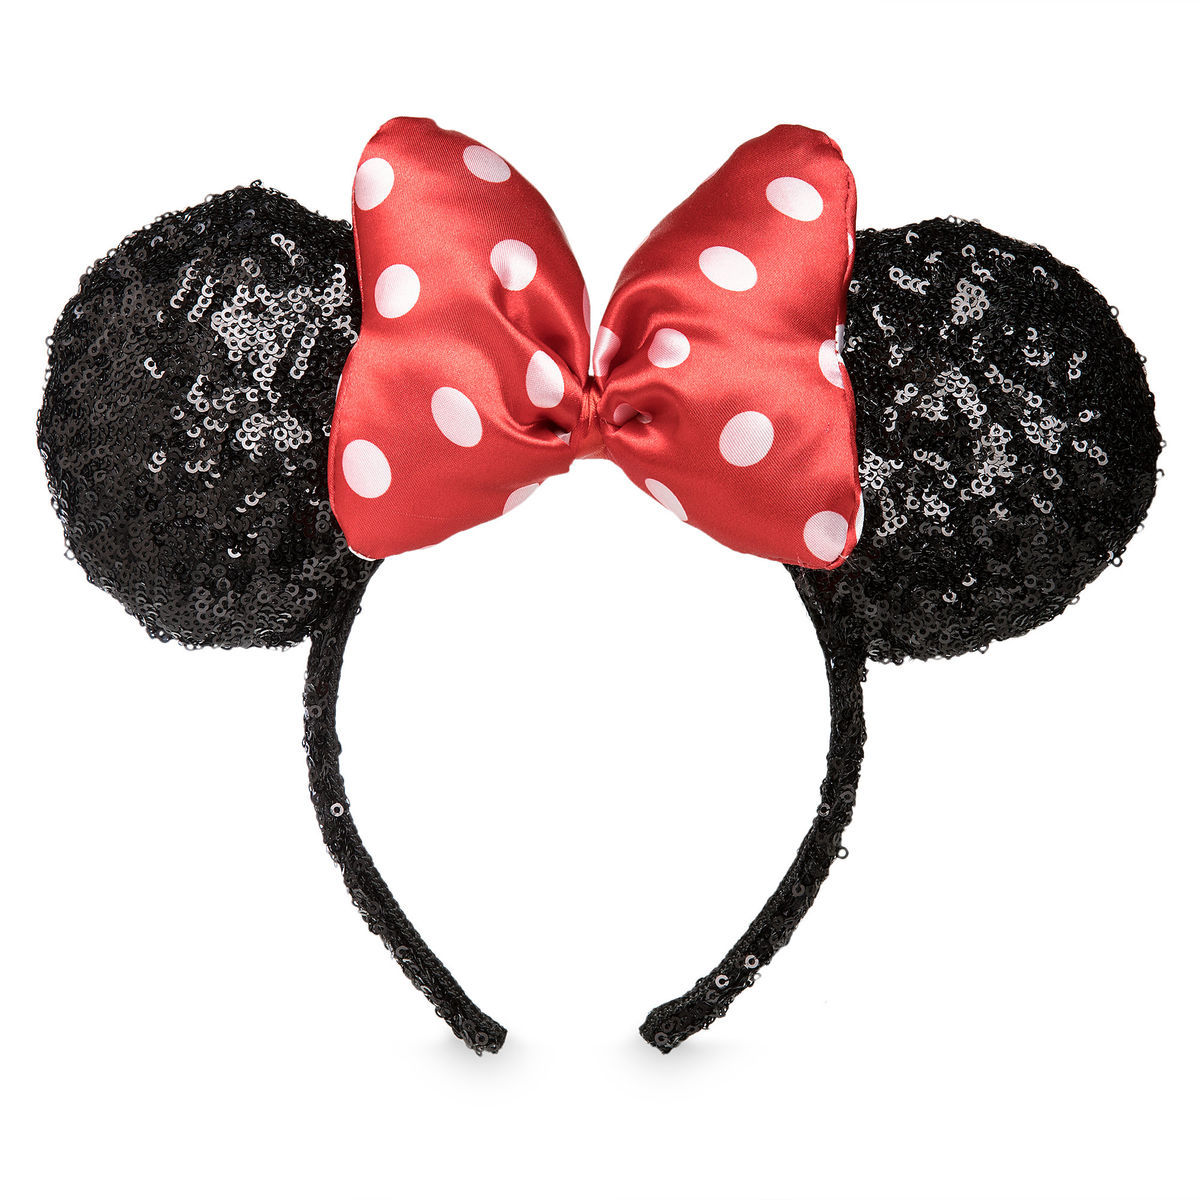 Product Image of Minnie Mouse Sequined Ear Headband with Satin Bow # 1